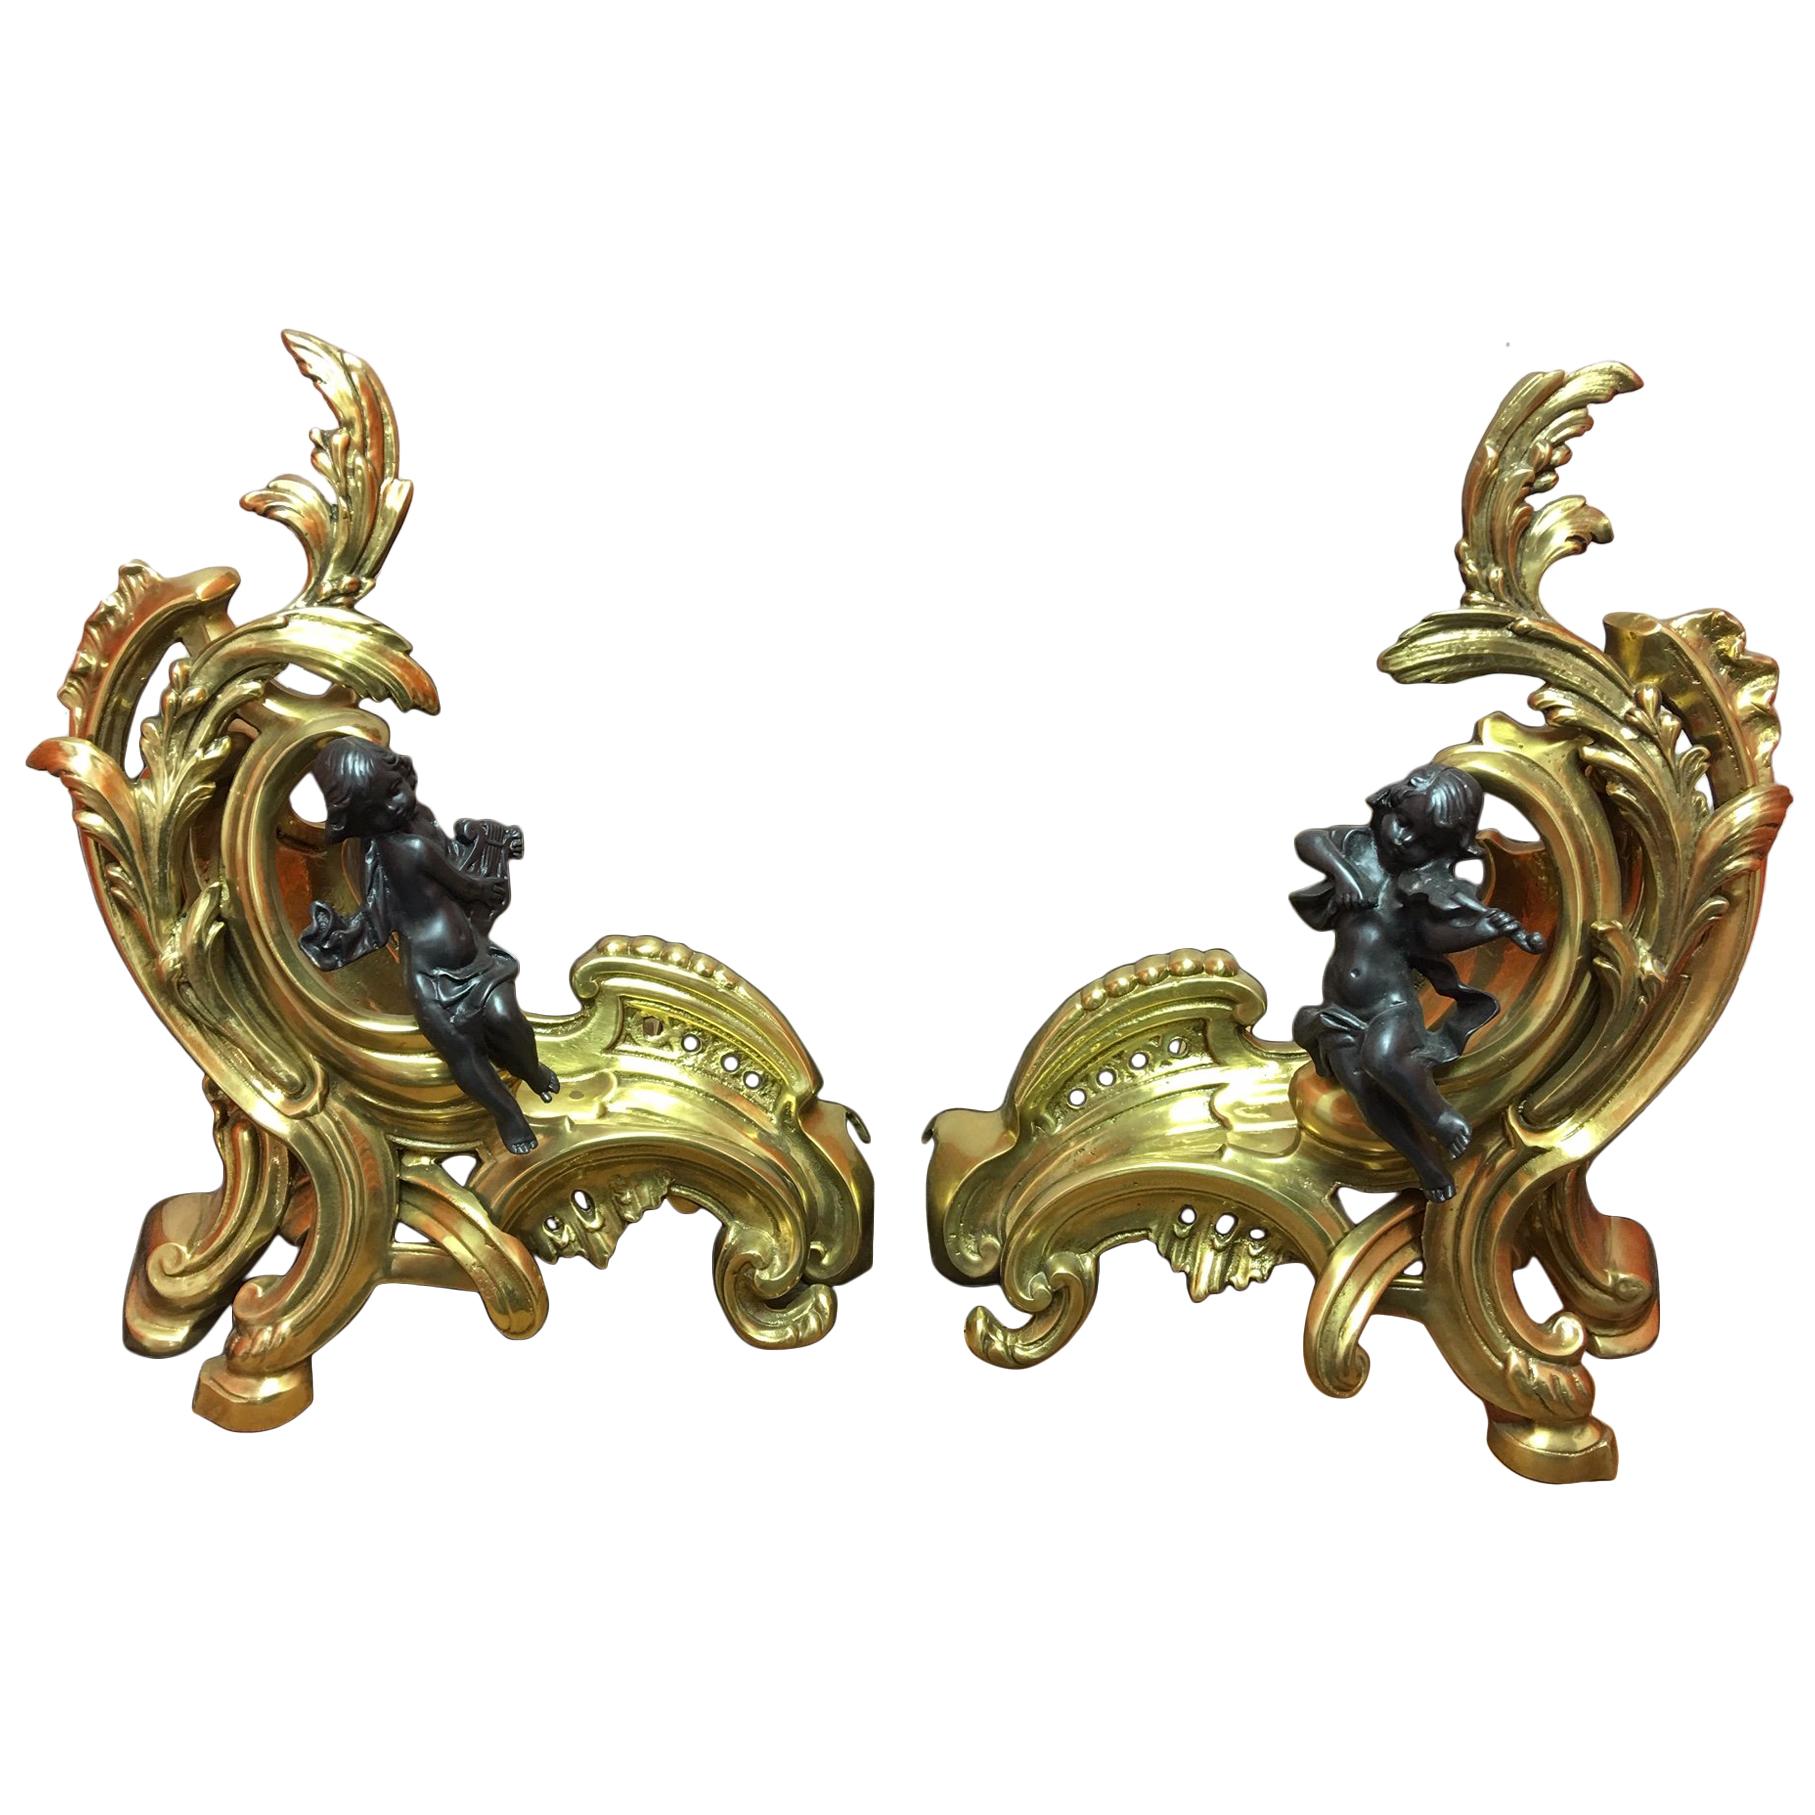 Pair of Figural Bronze Chenets with a Fender, Early 20th Century